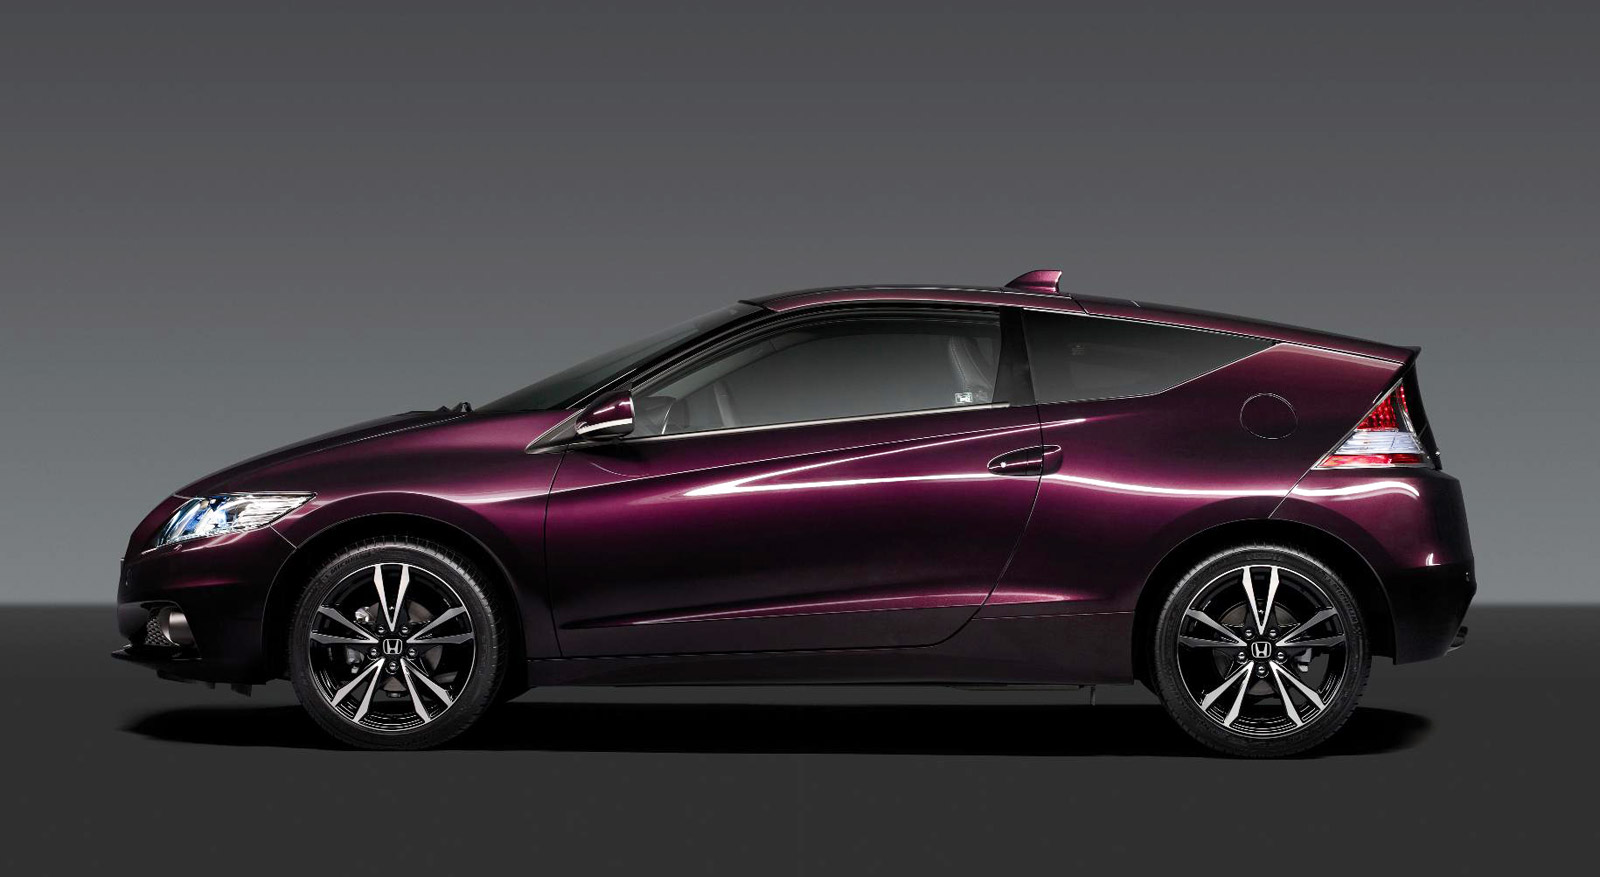 2013 Honda CR-Z Hybrid Coupe: More Power, New Battery, Updated Style